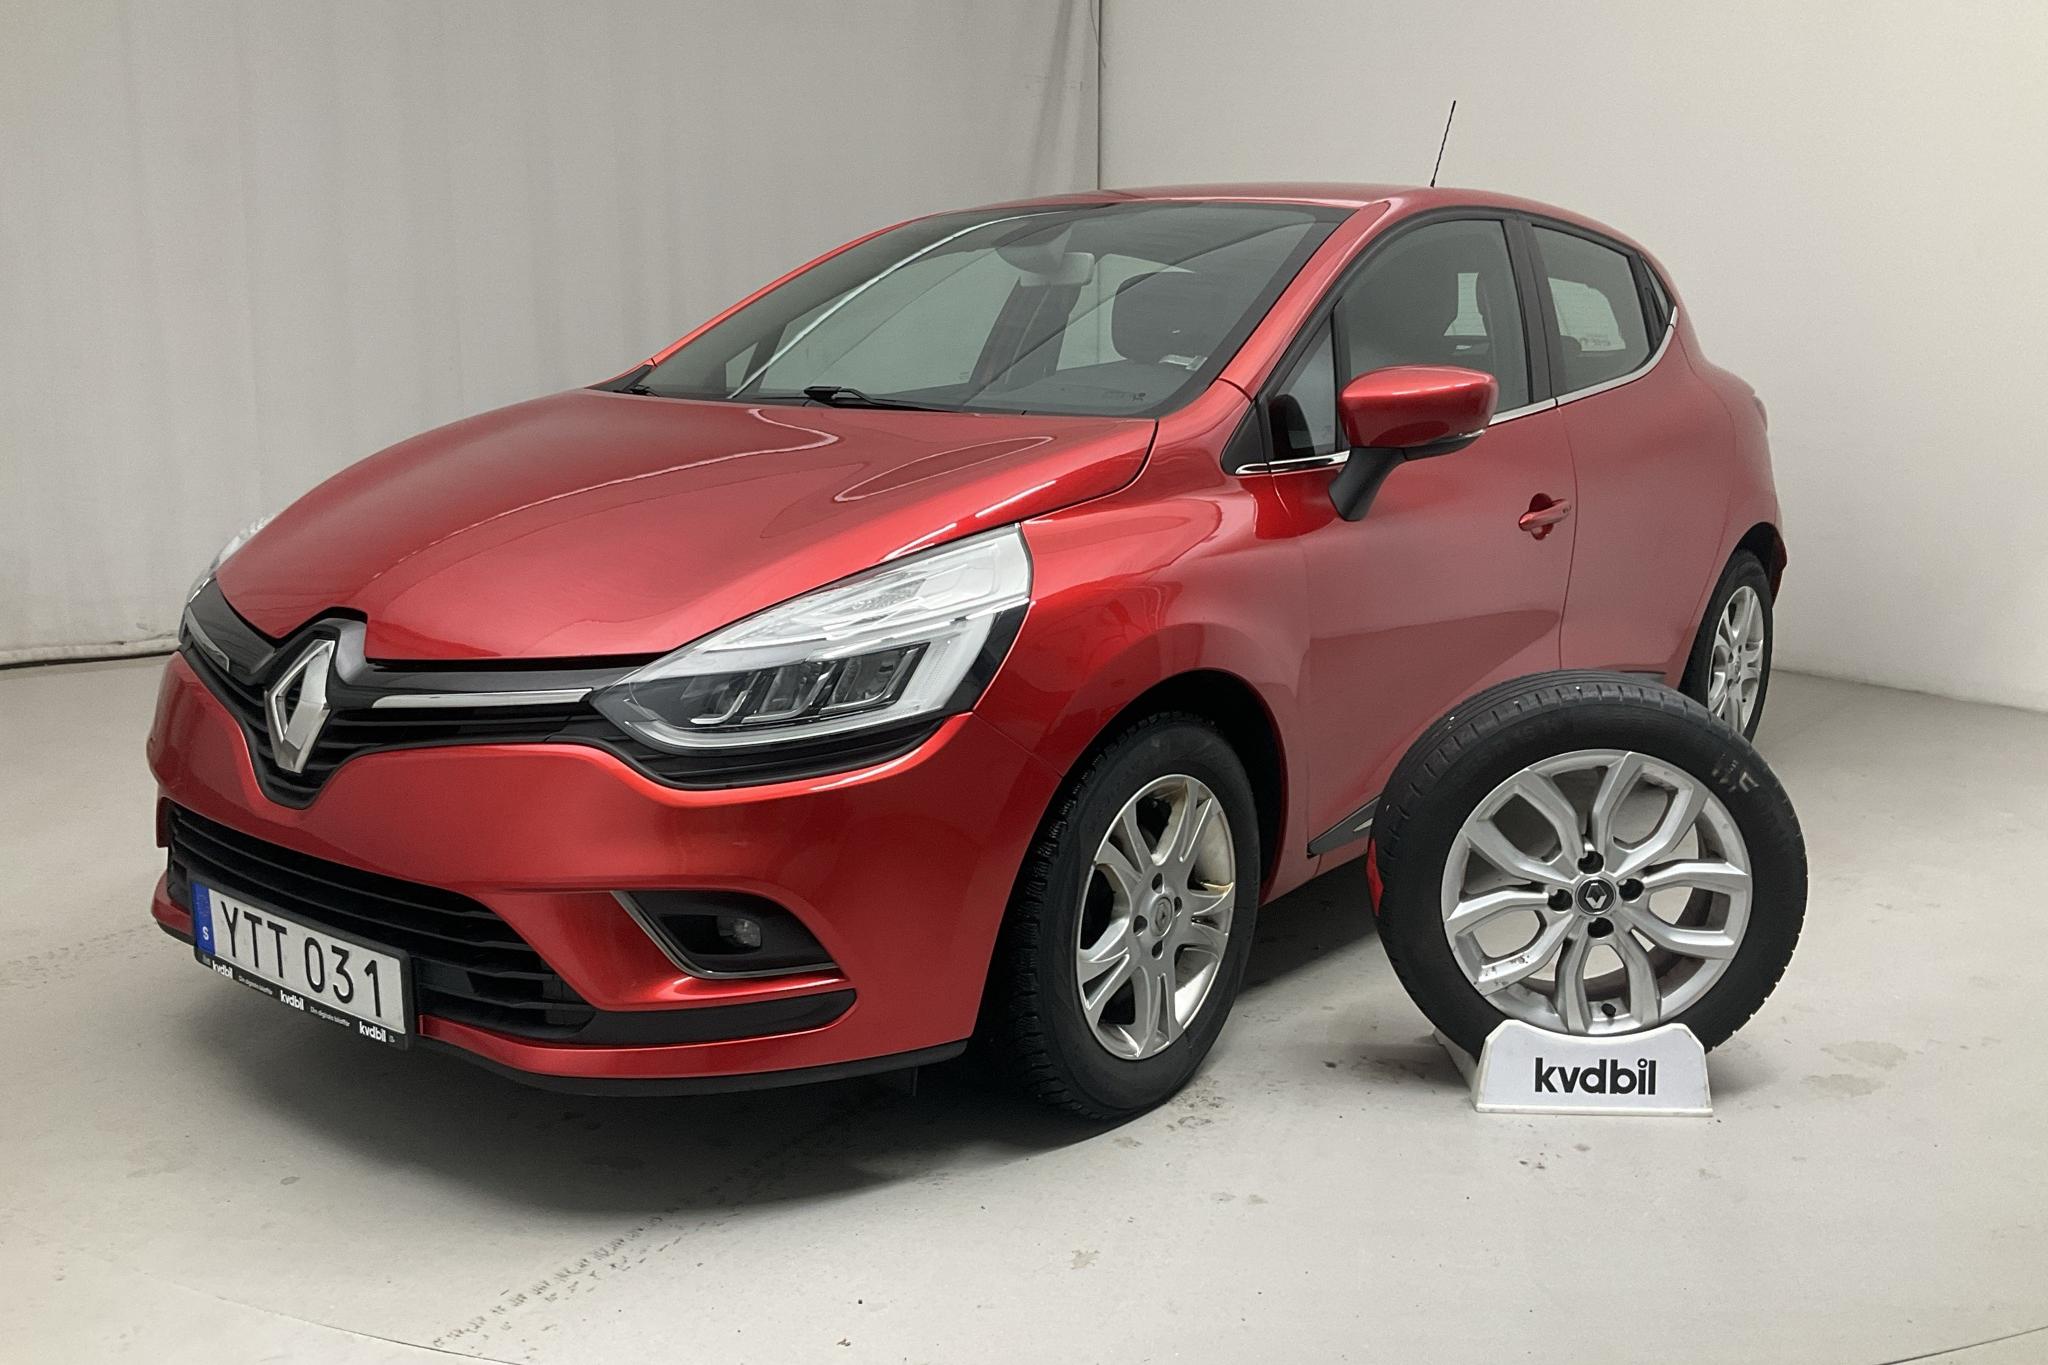 Renault Clio IV 0.9 TCe 90 5dr (90hk) - 67 030 km - Manual - red - 2018